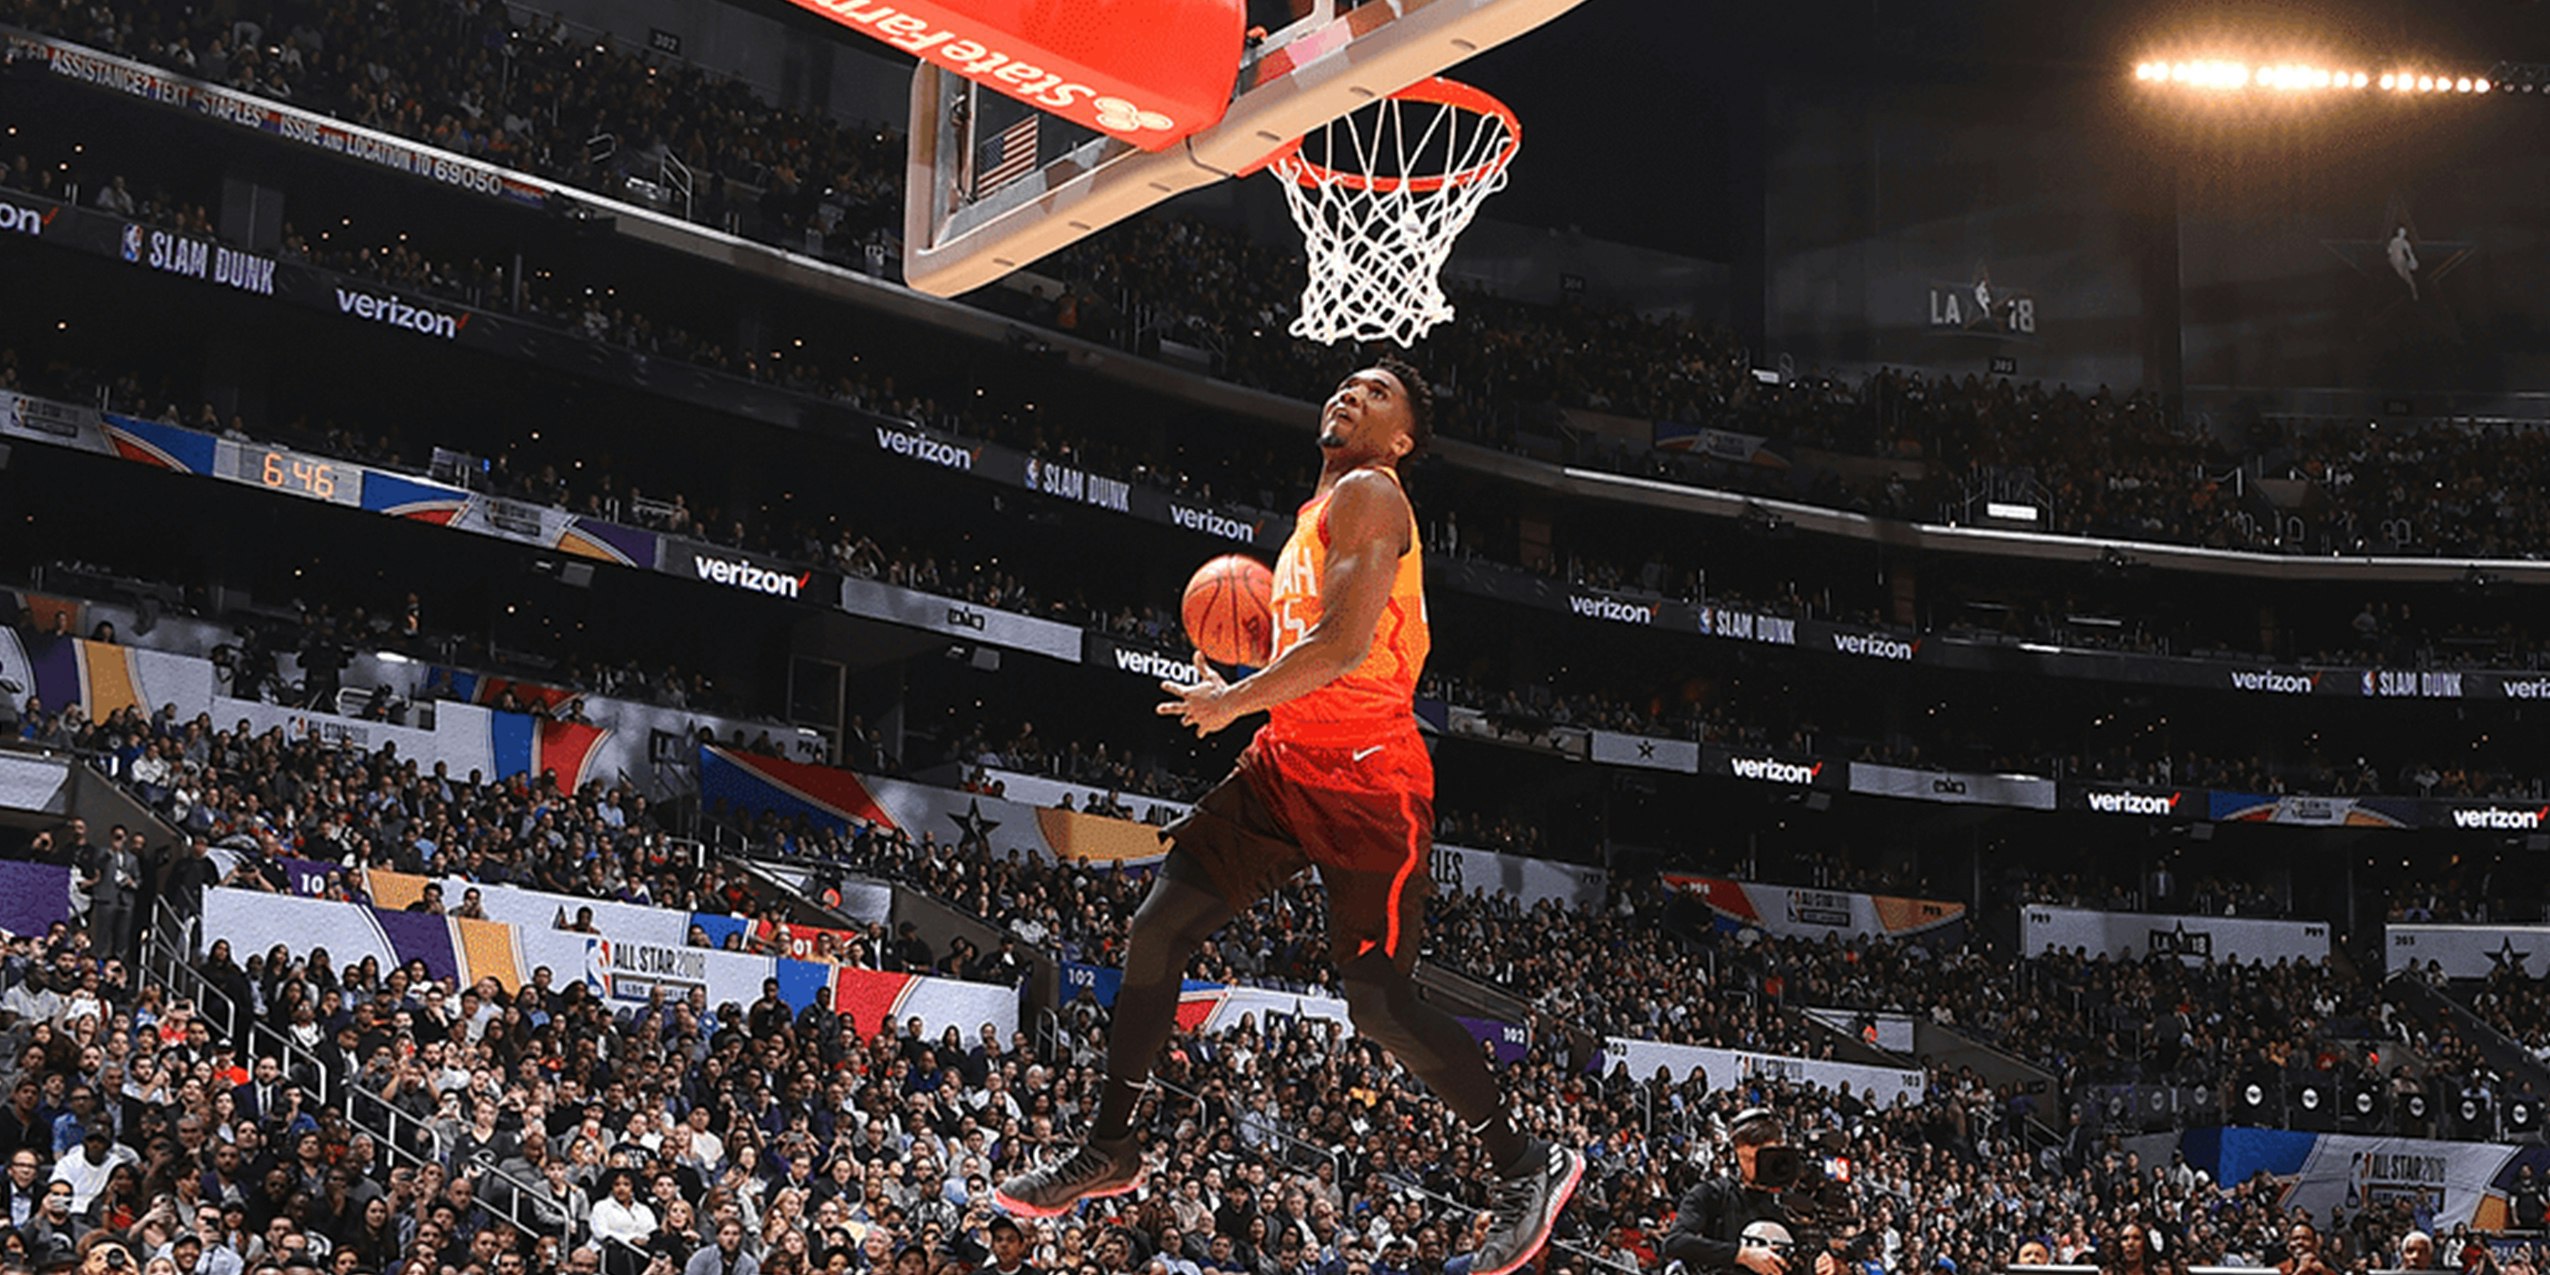 NBA Dunk Contest 2019 Where to Watch Online for Free